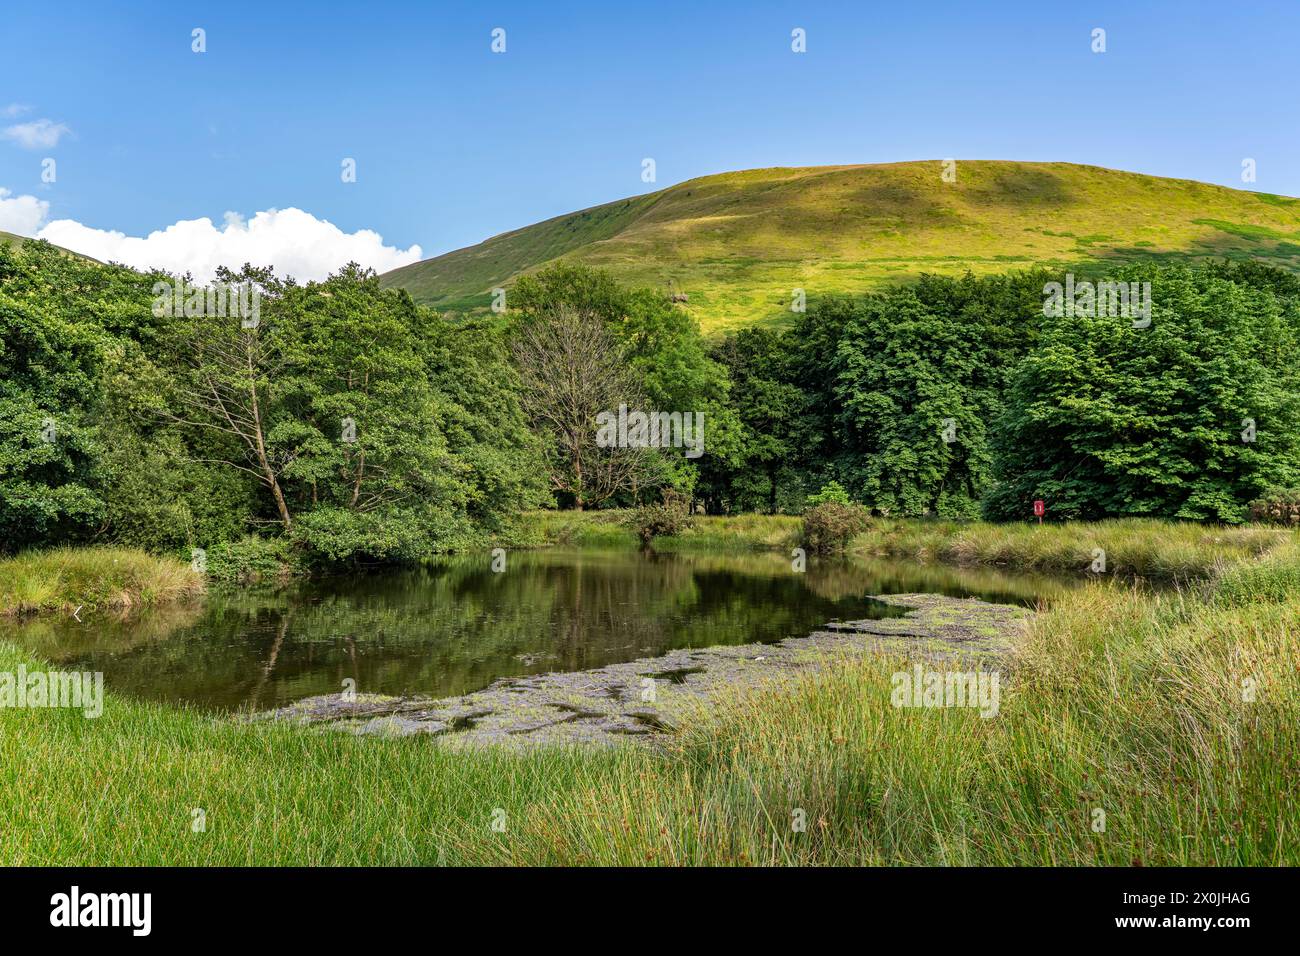 Lake in Snowdonia National Park, Wales, Great Britain, Europe Stock Photo